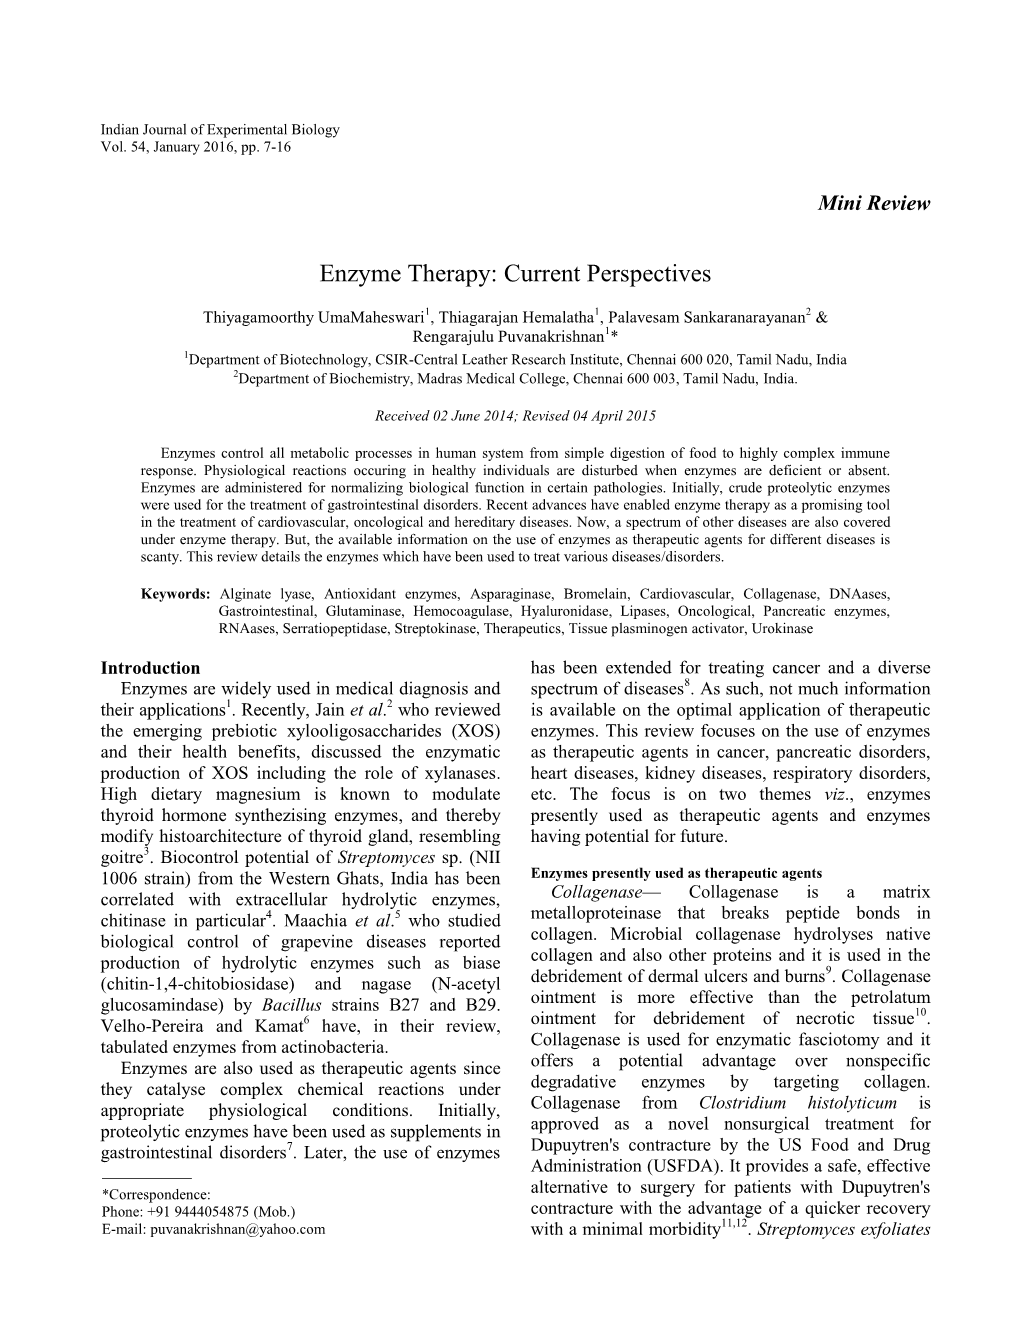 Enzyme Therapy: Current Perspectives